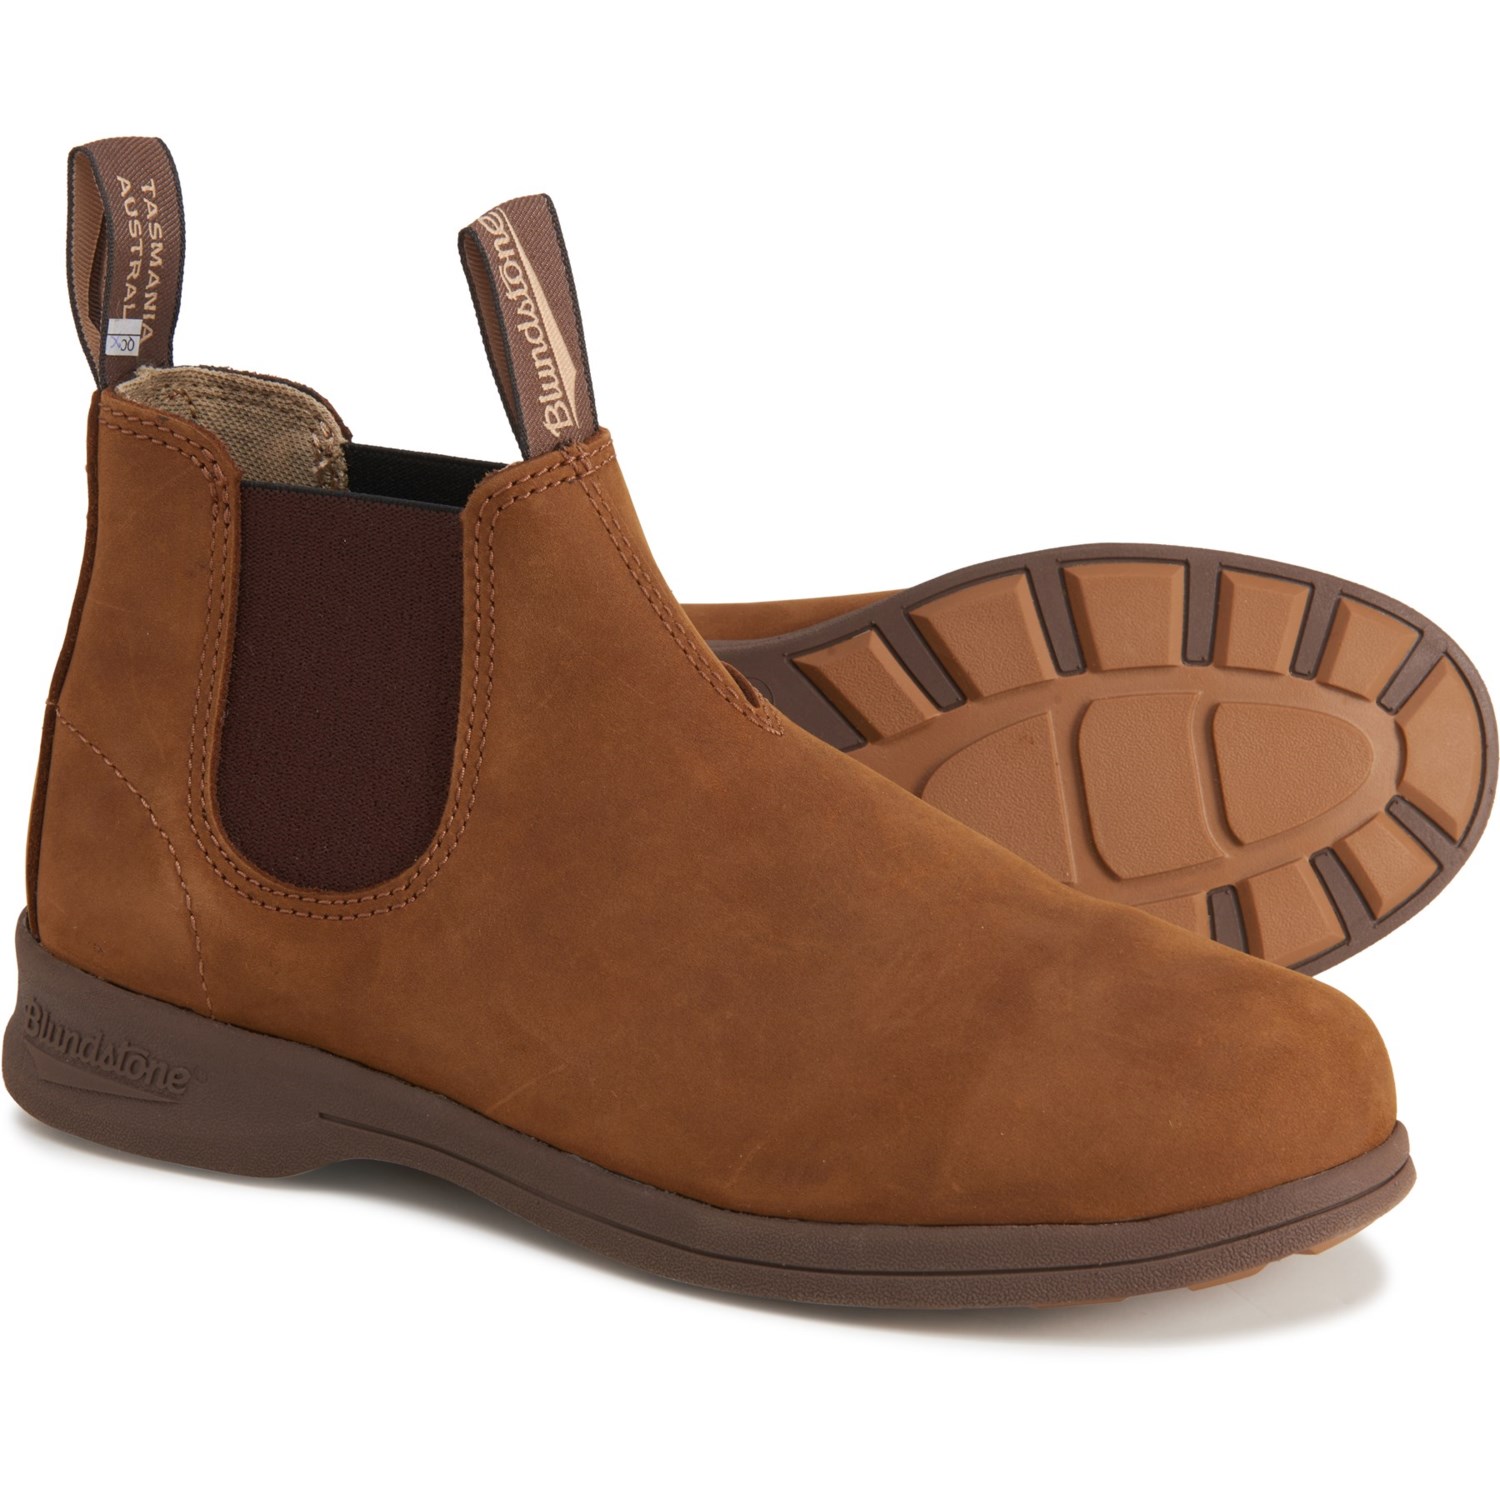 Blundstone 1497 Chelsea Boots (For 